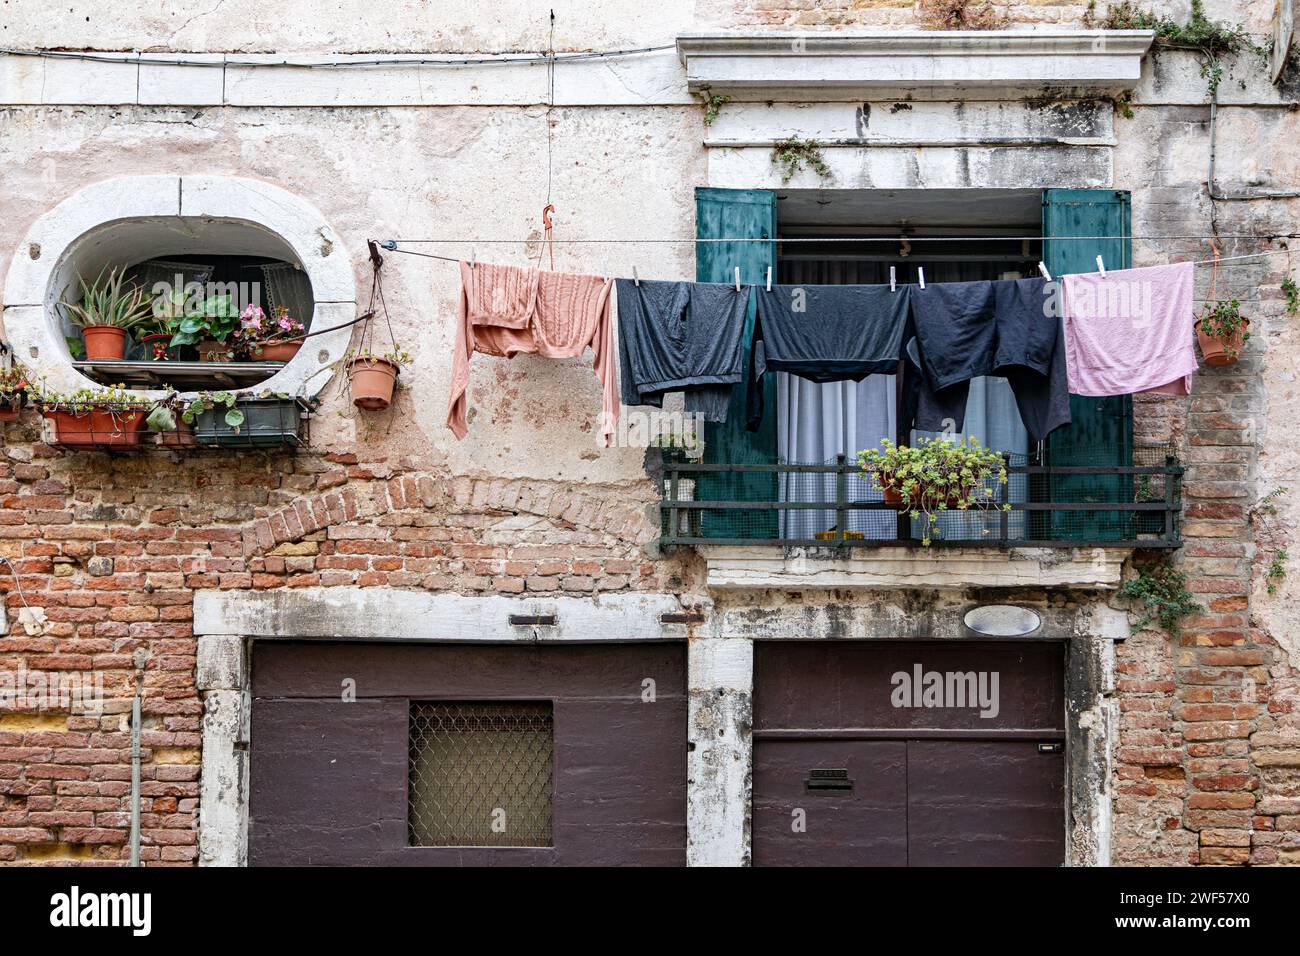 cloths hanging on the clothesline in Venice Italy Stock Photo